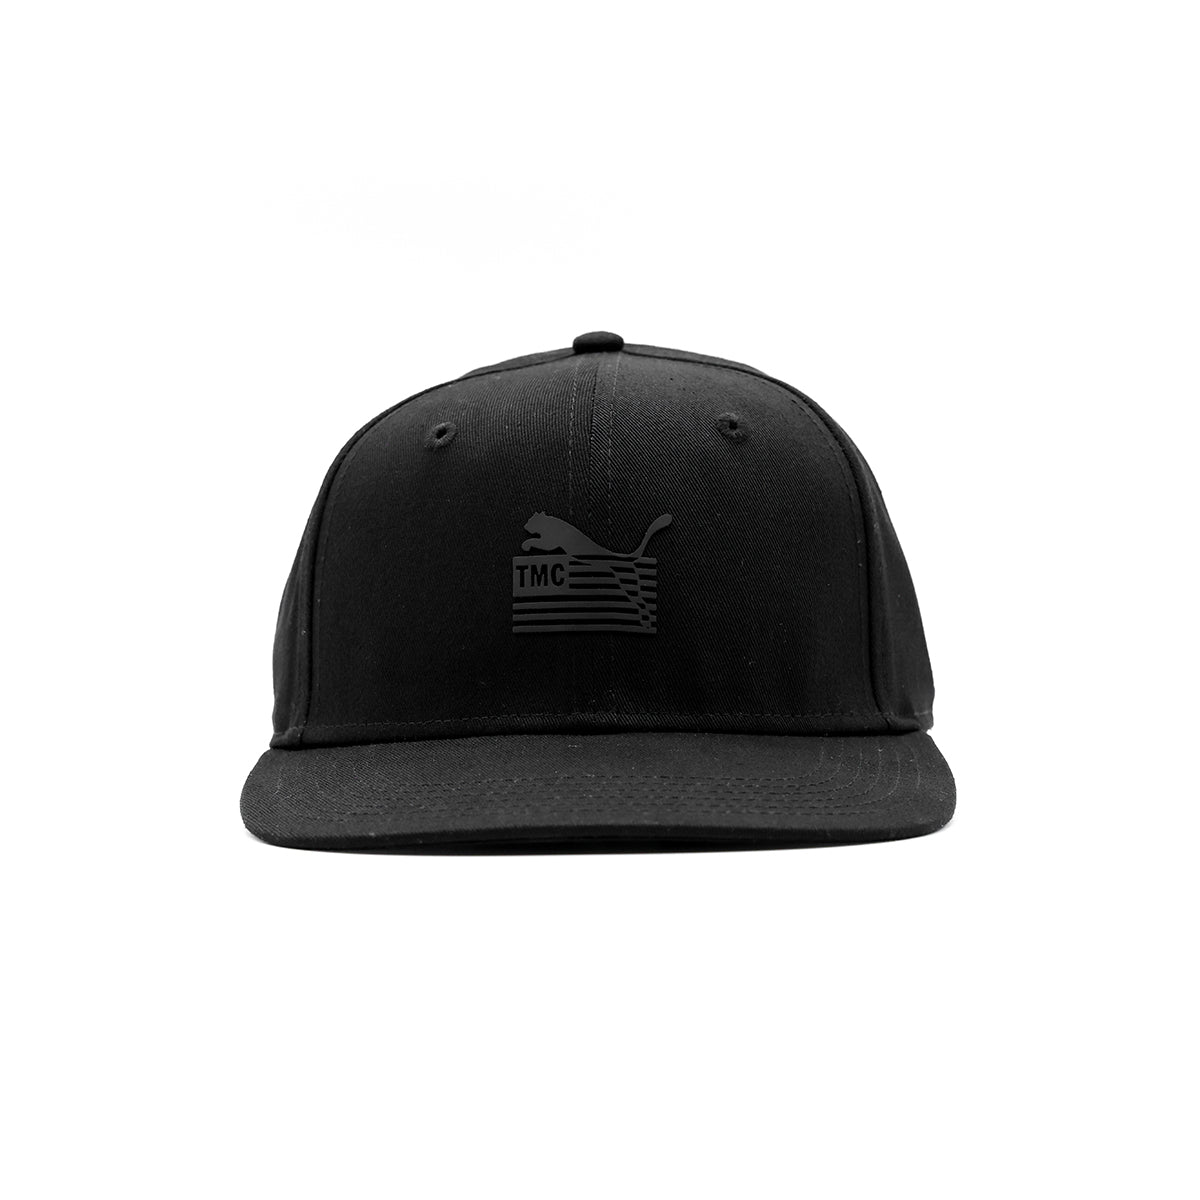 PUMA x TMC Everyday Hussle Collection Snapback - Black - Front